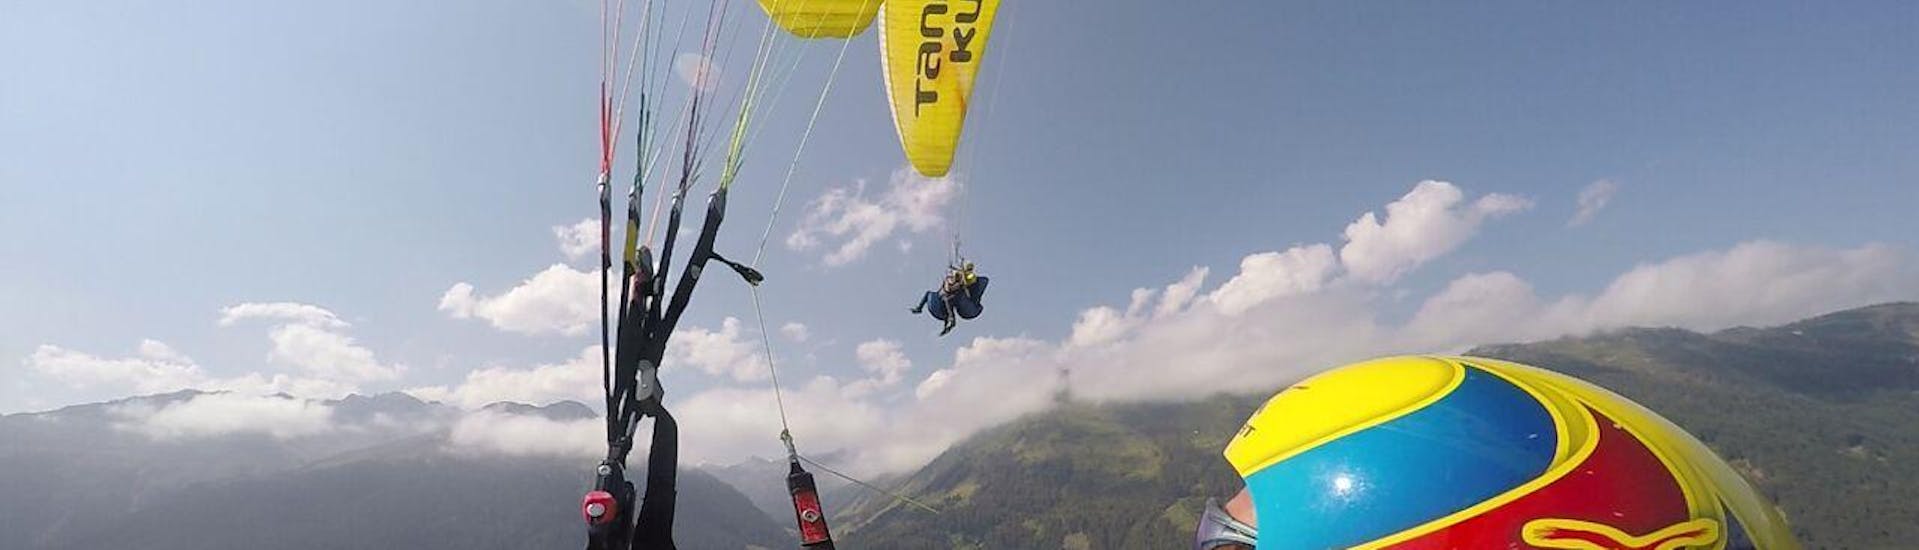 Tandem Paragliding for Couples in Montafon.